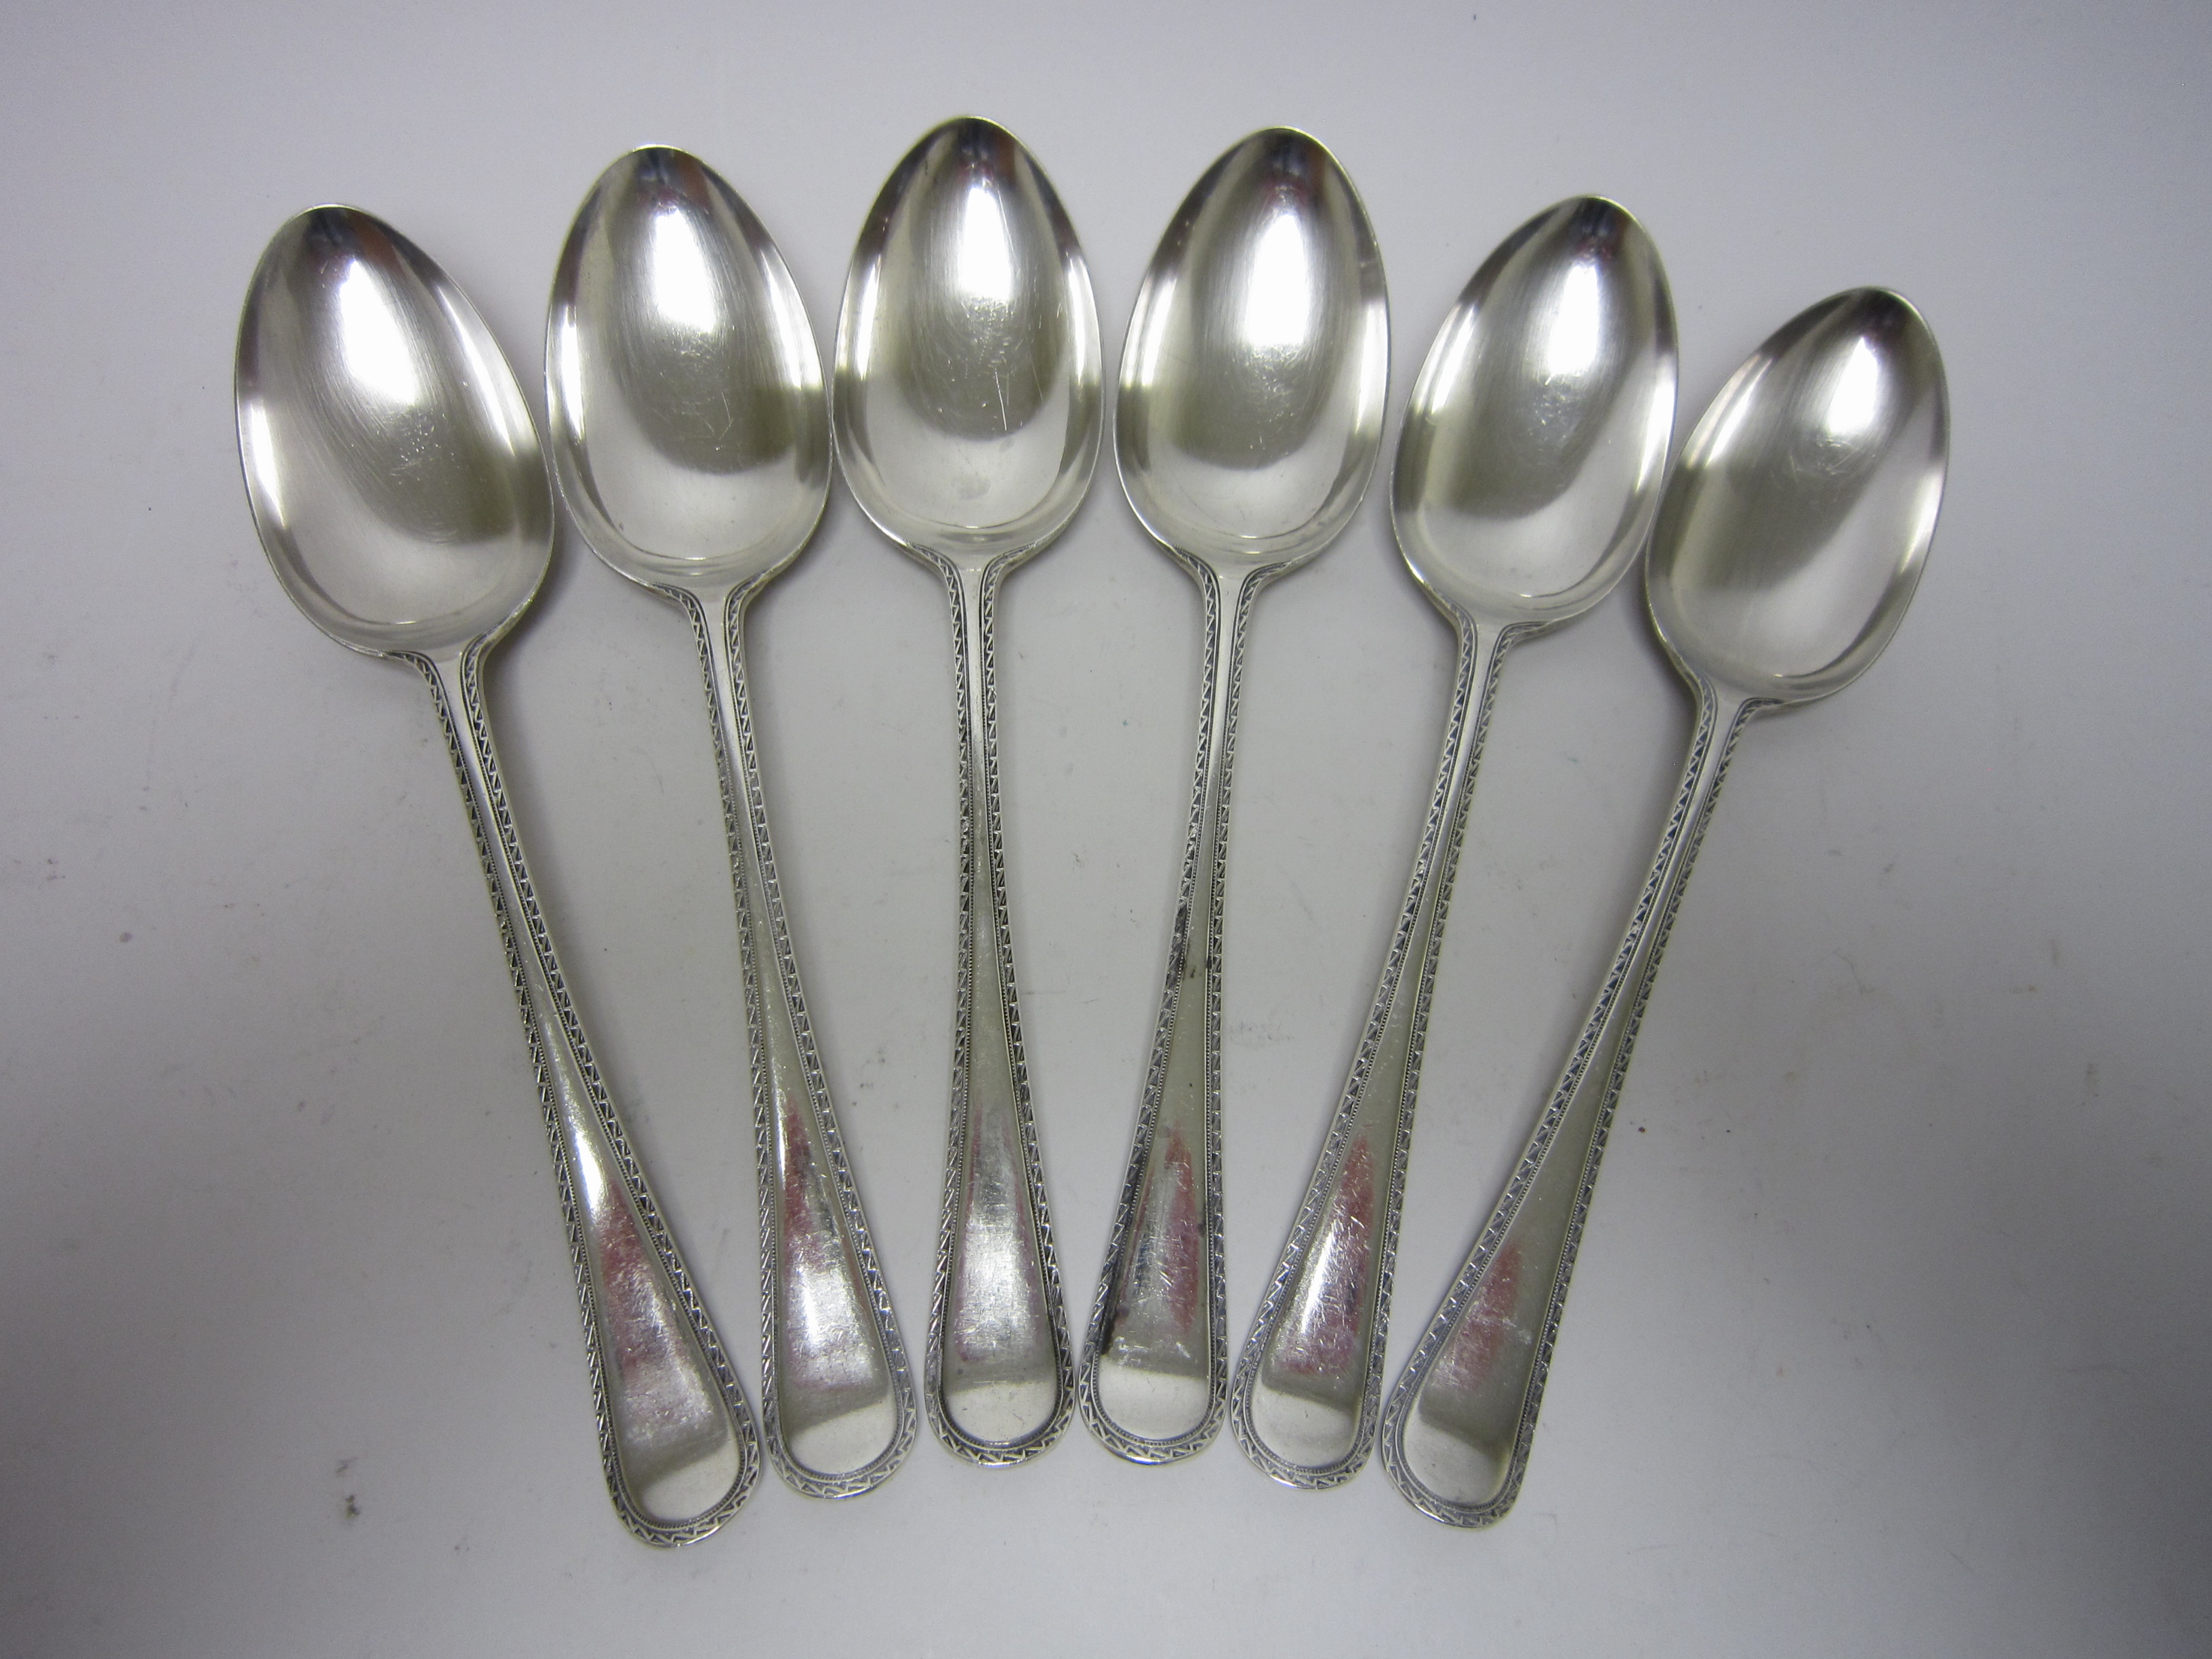 Six Victorian silver Table Spoons with feather edge stems, Birmingham 1883, maker: F Elkington